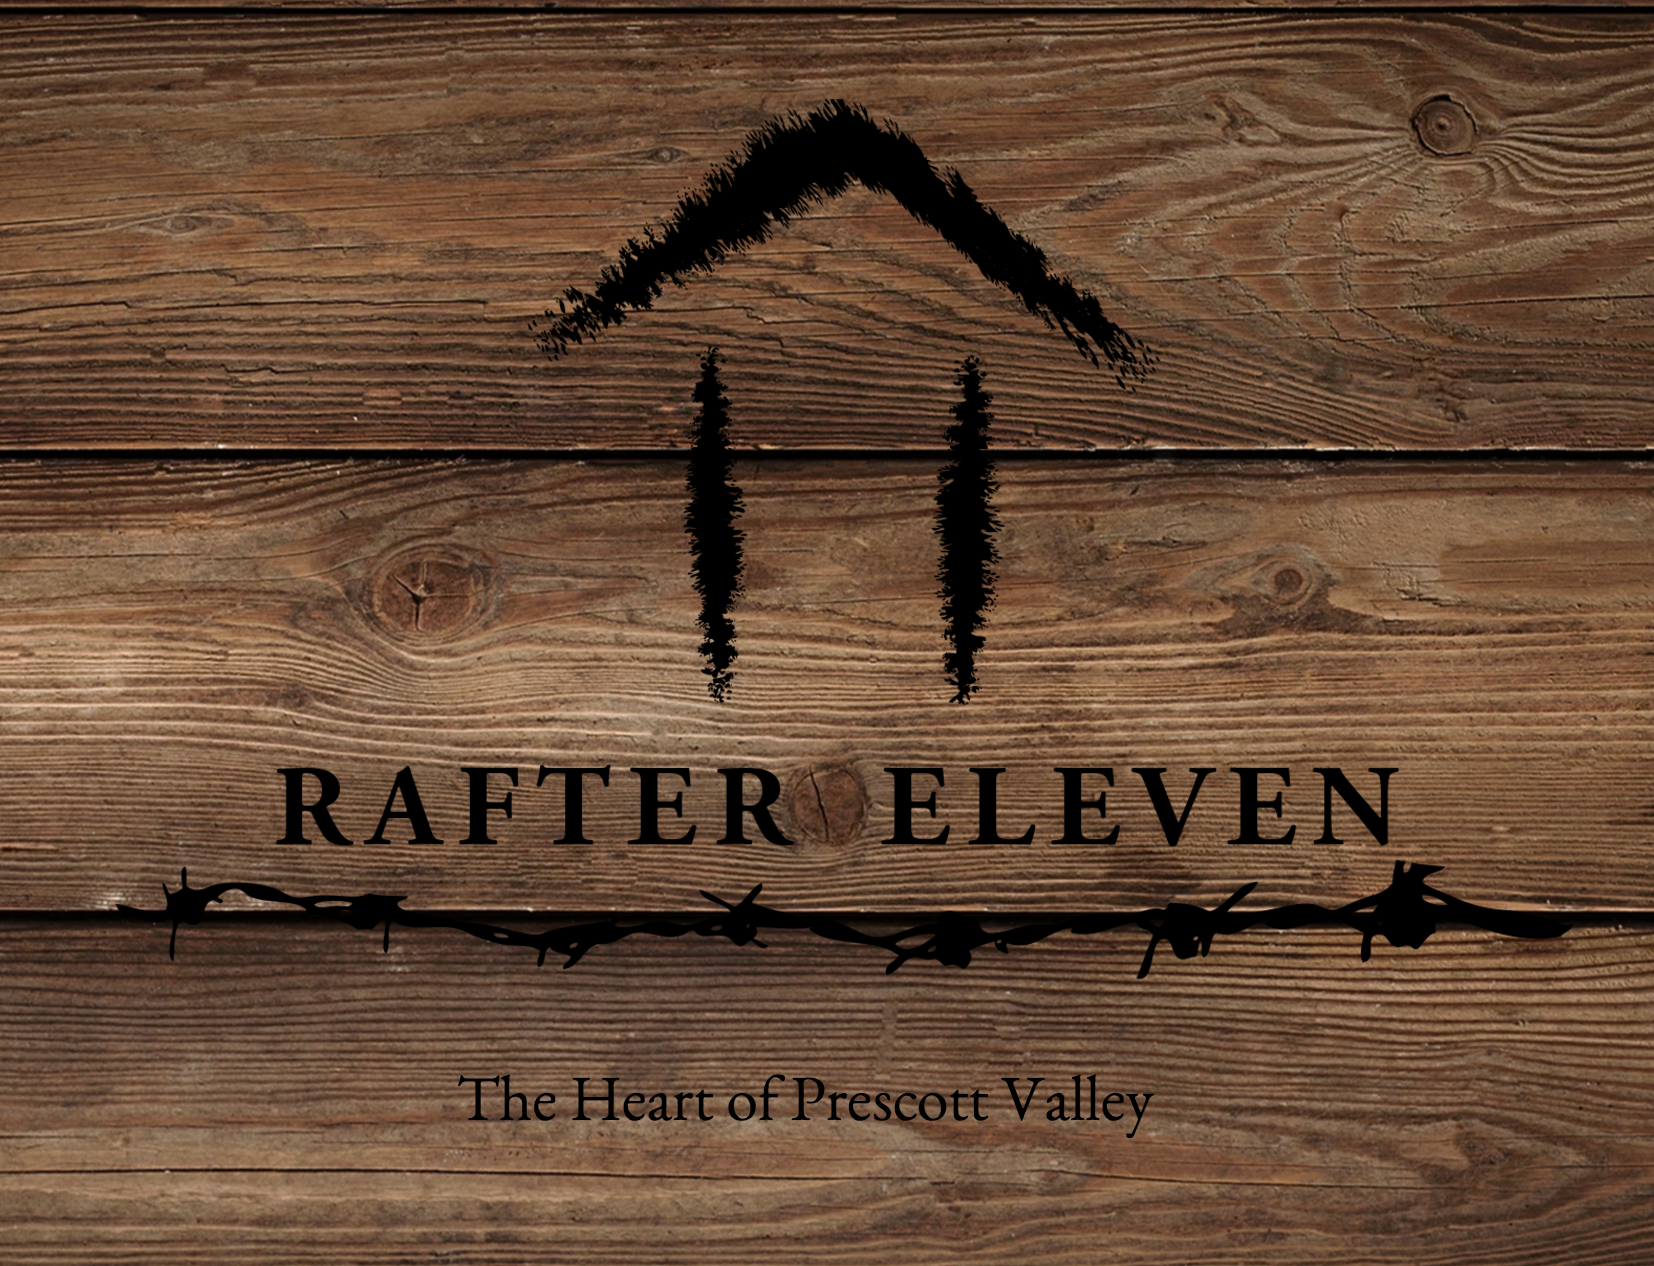 Rafter Eleven is Prescott Valley’s Newest Tasting Experience